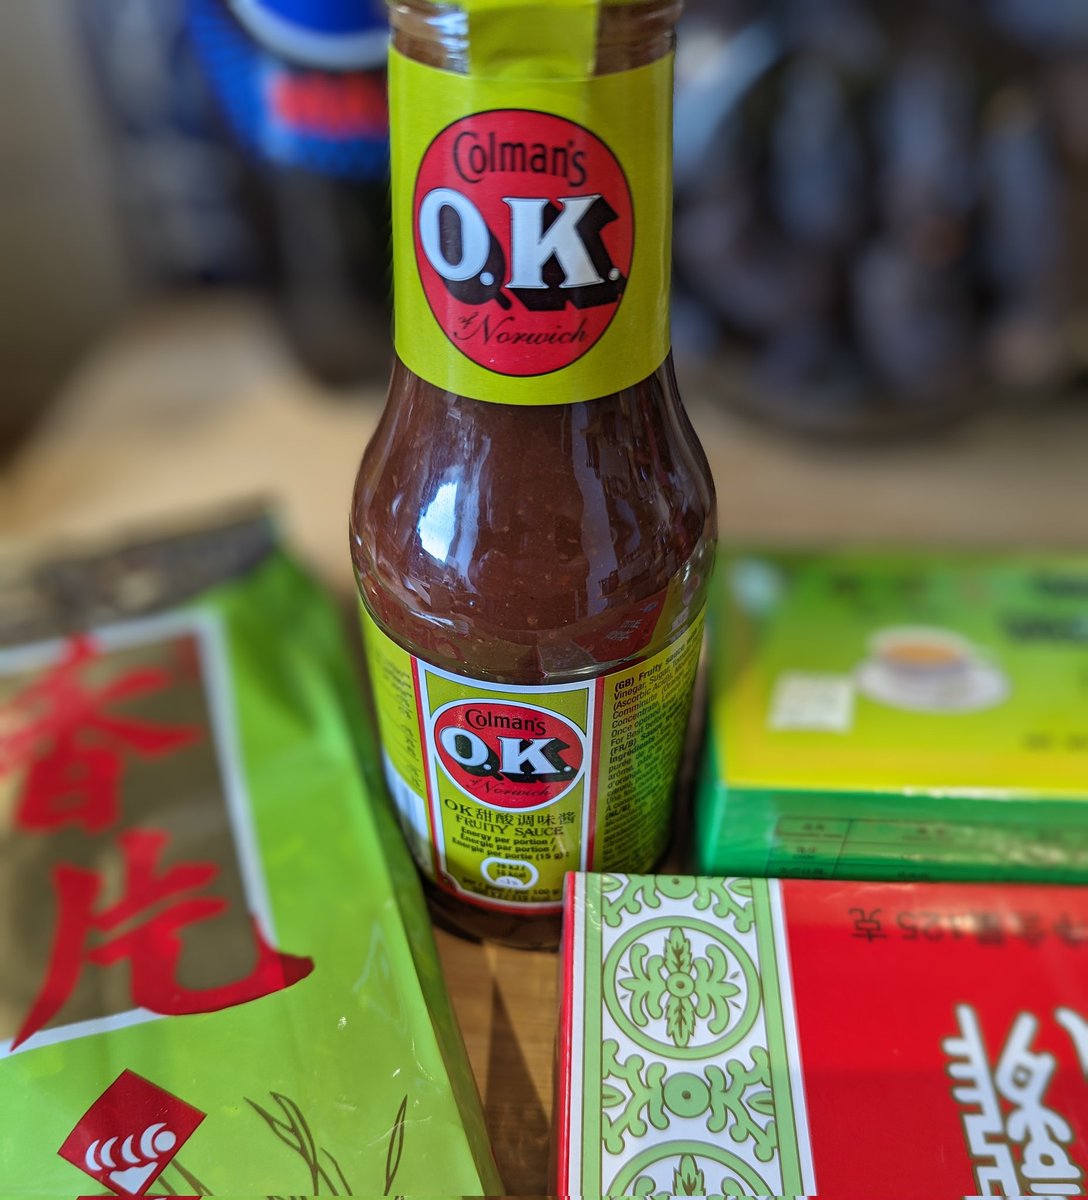 Picked up some O.K. Fruity Sauce in the Chinese supermarket. Haven't seen it in years...